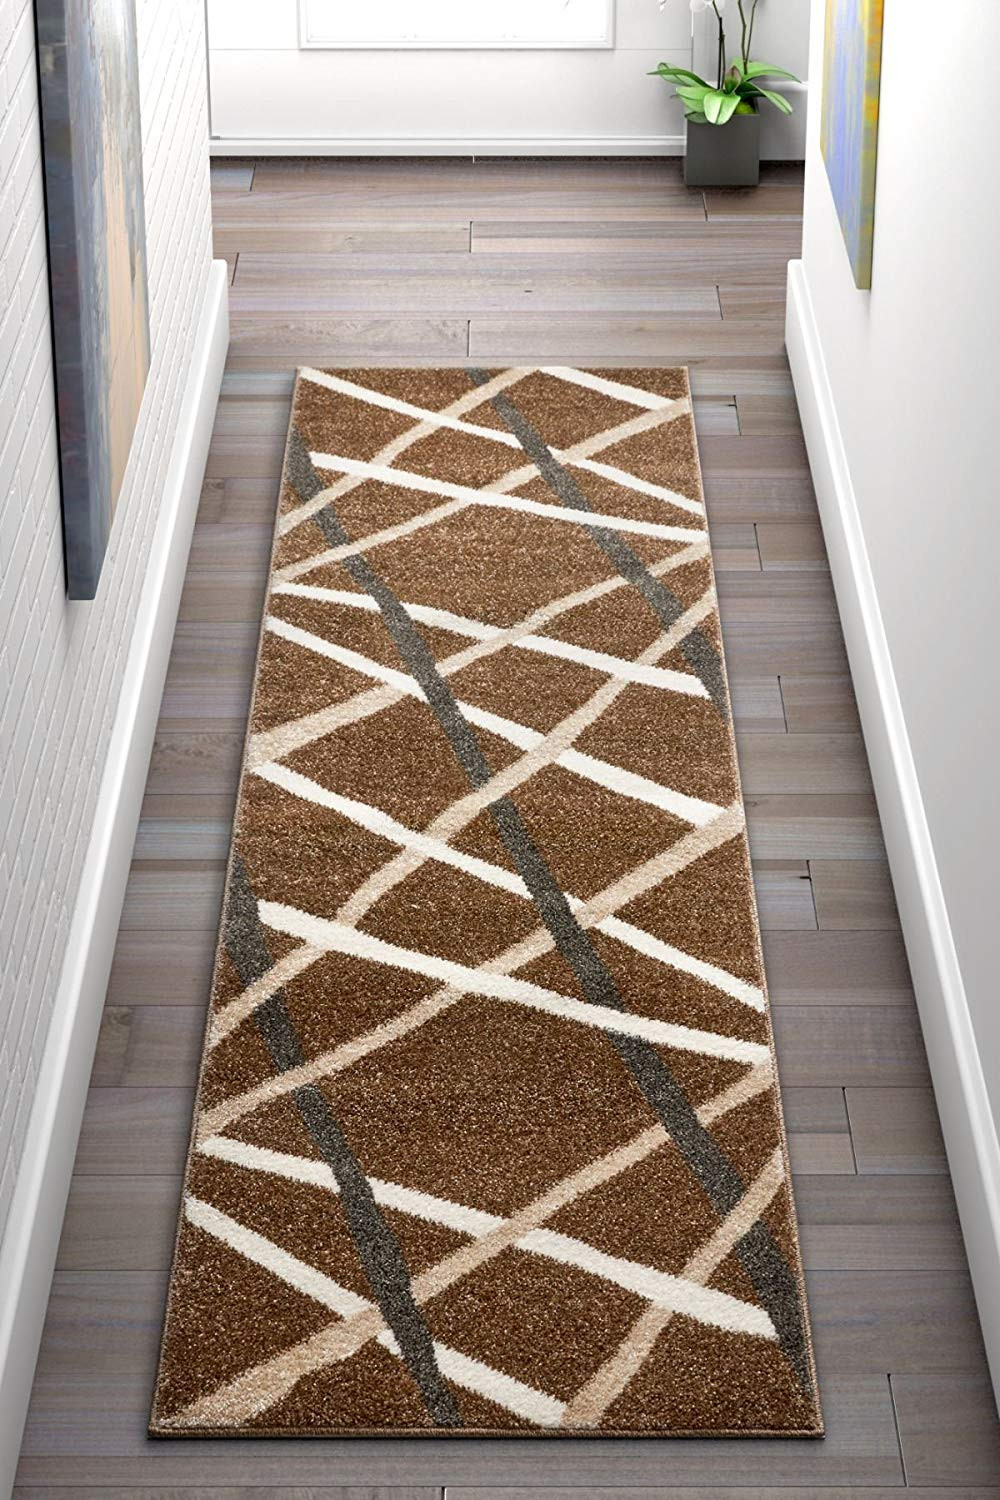 26 Perfect Superior Hardwood Flooring Rockwood Ontario 2023 free download superior hardwood flooring rockwood ontario of amazon com well woven traverse stripes brown geometric modern lines in amazon com well woven traverse stripes brown geometric modern lines area